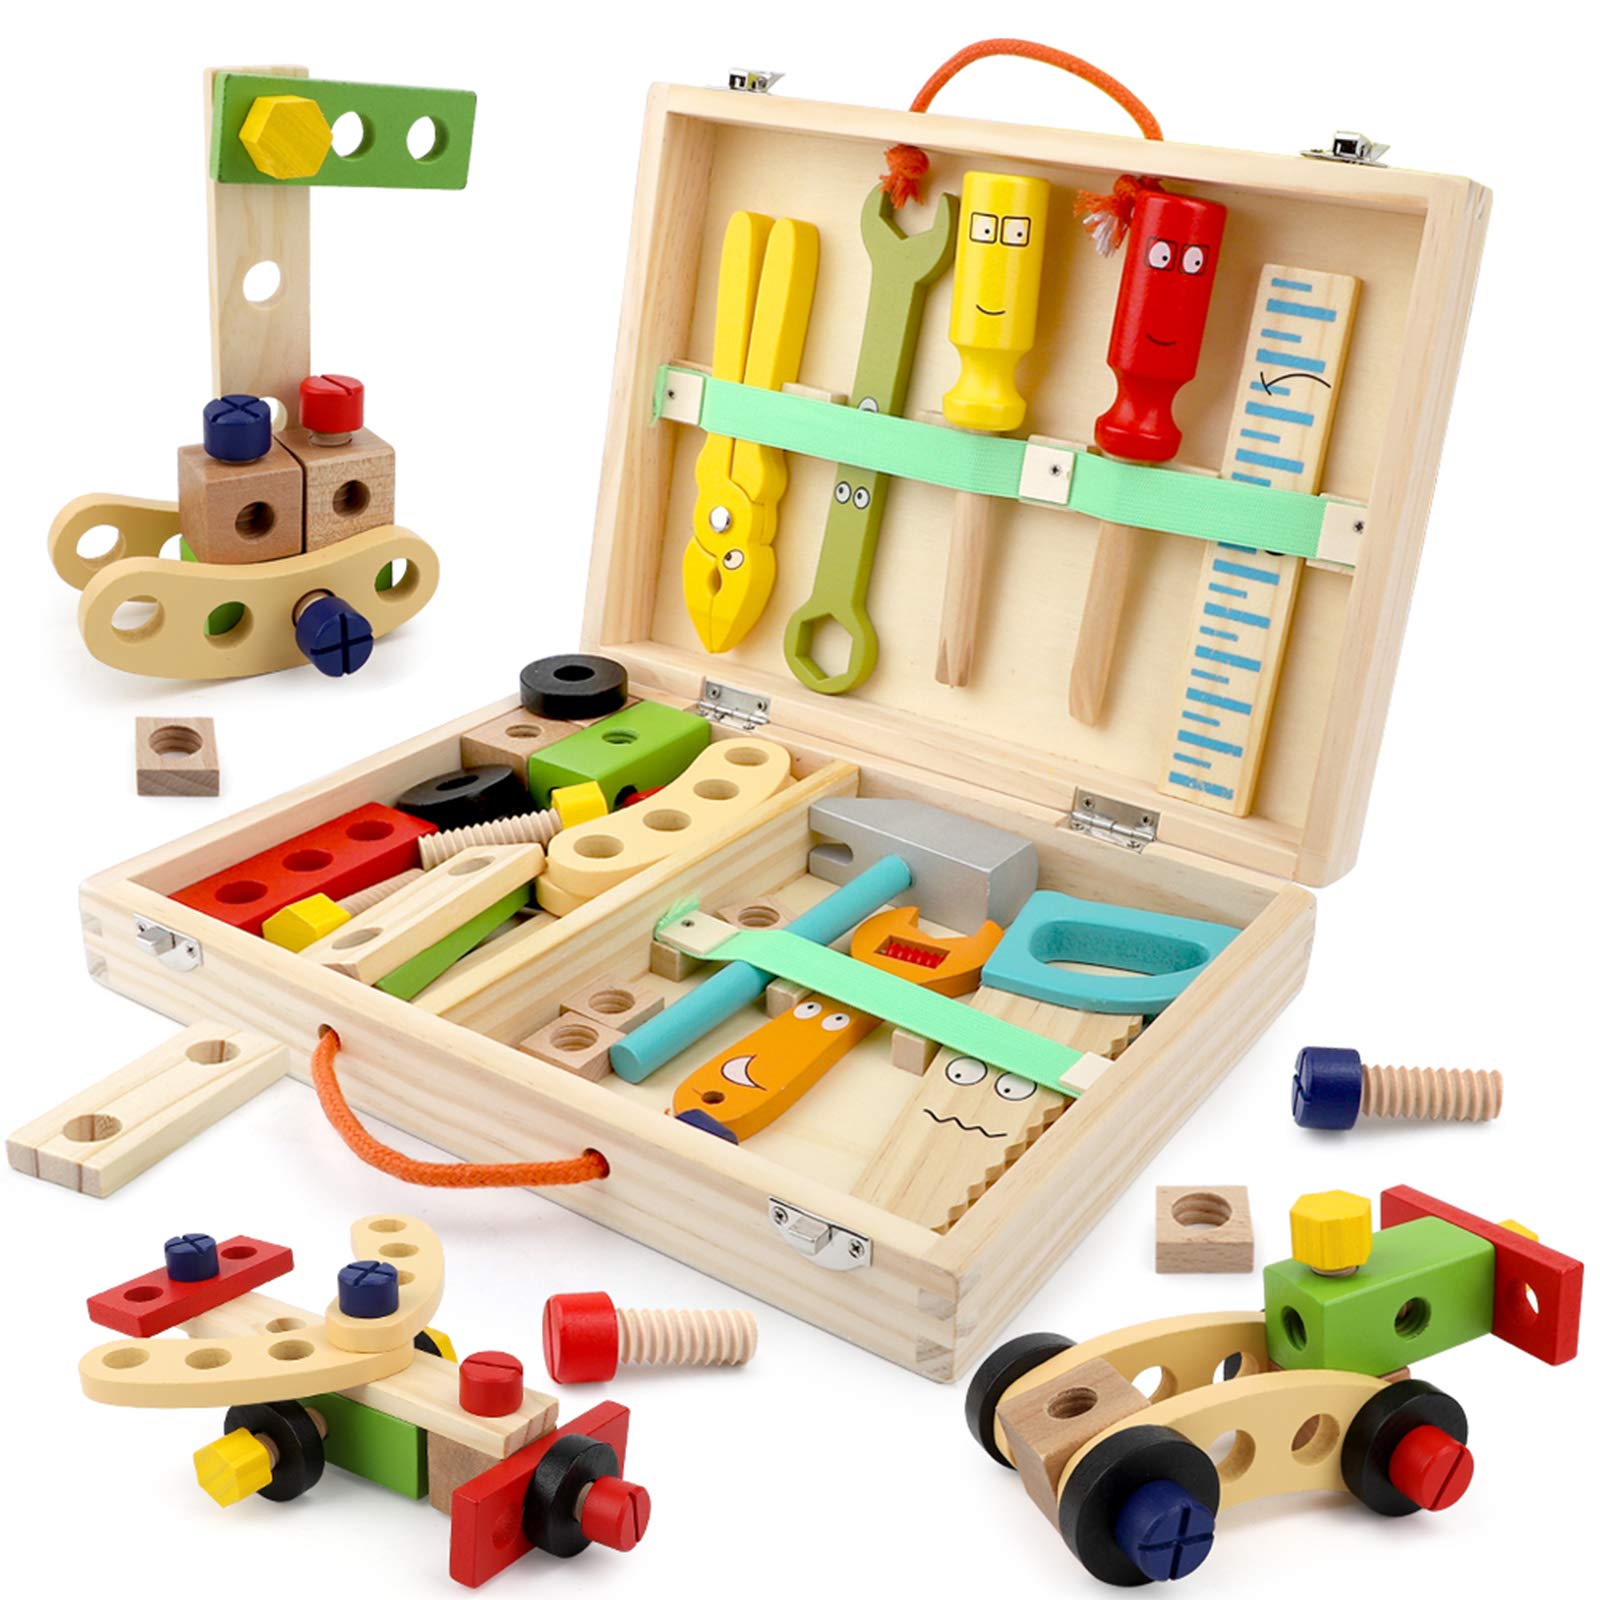 OEM/ODM Factory Wooden Toy Train Set - BeebeeRun Tool Kit for Kids Wooden Tool Box Set with Colorful Tools Pretend Play Toys Gifts for Toddlers Boys Girls Educational Construction Toy – Ealing